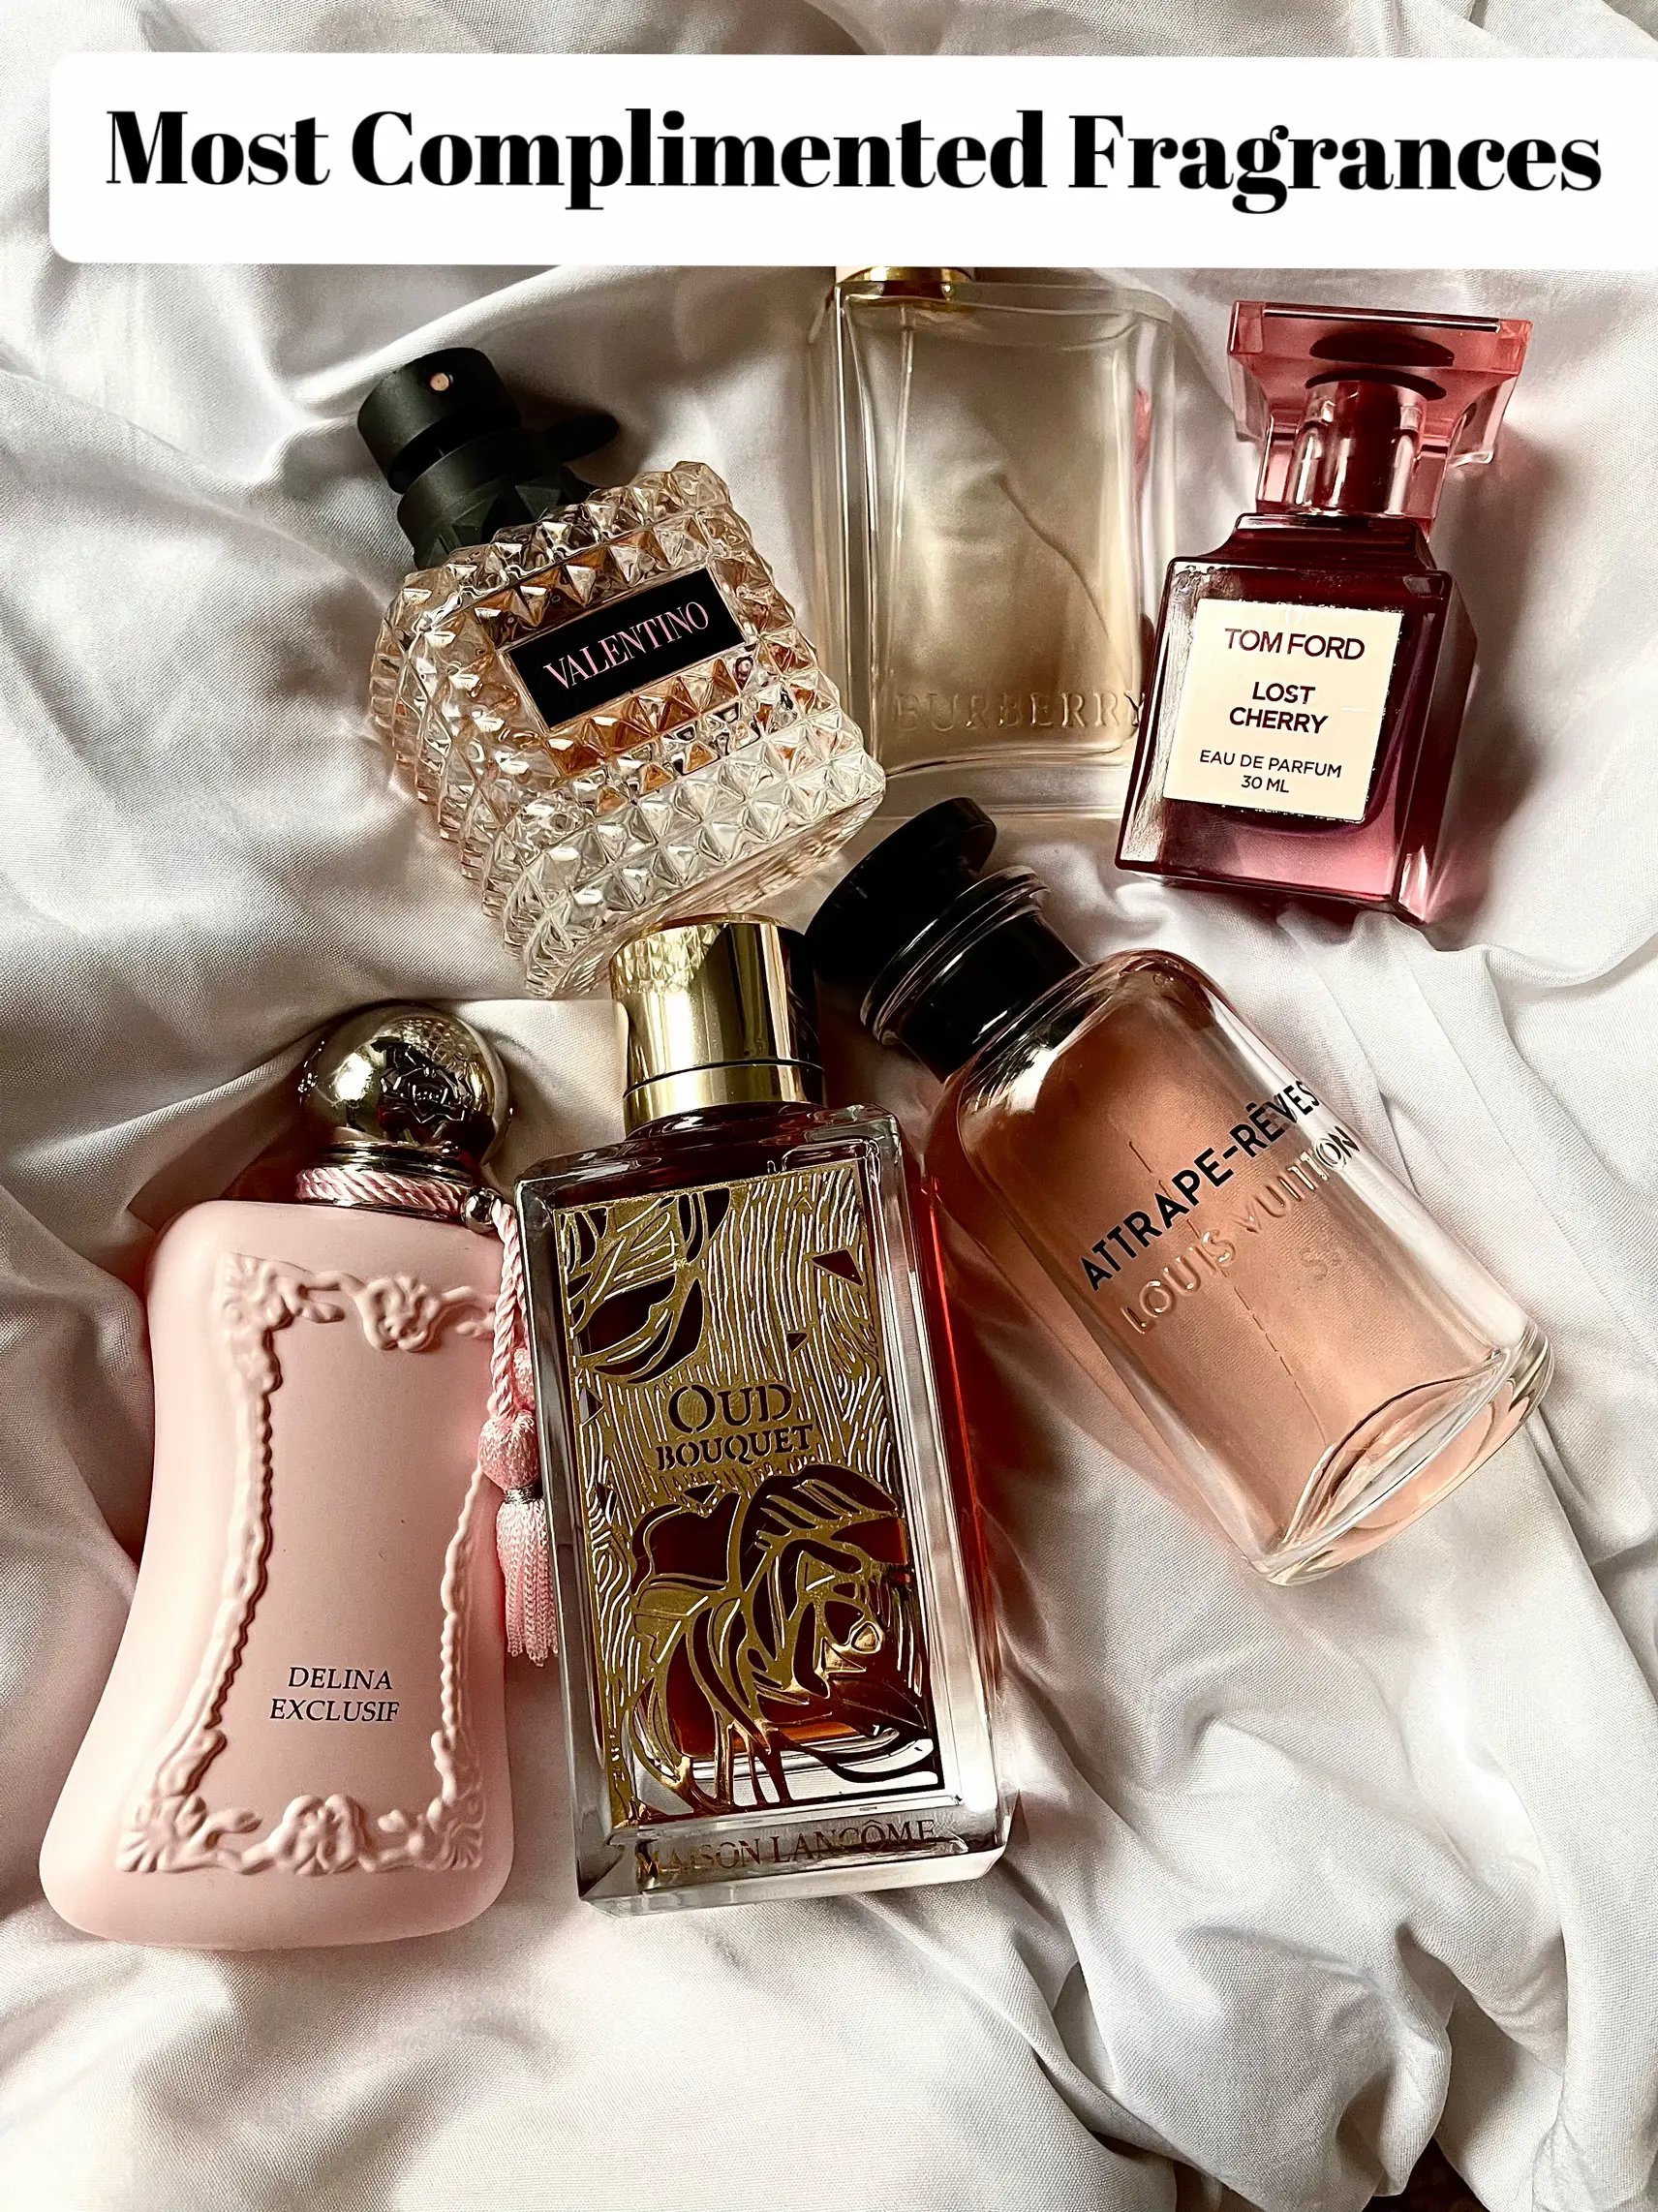 We ship perfume from L.V original stores as well. Talk to us and